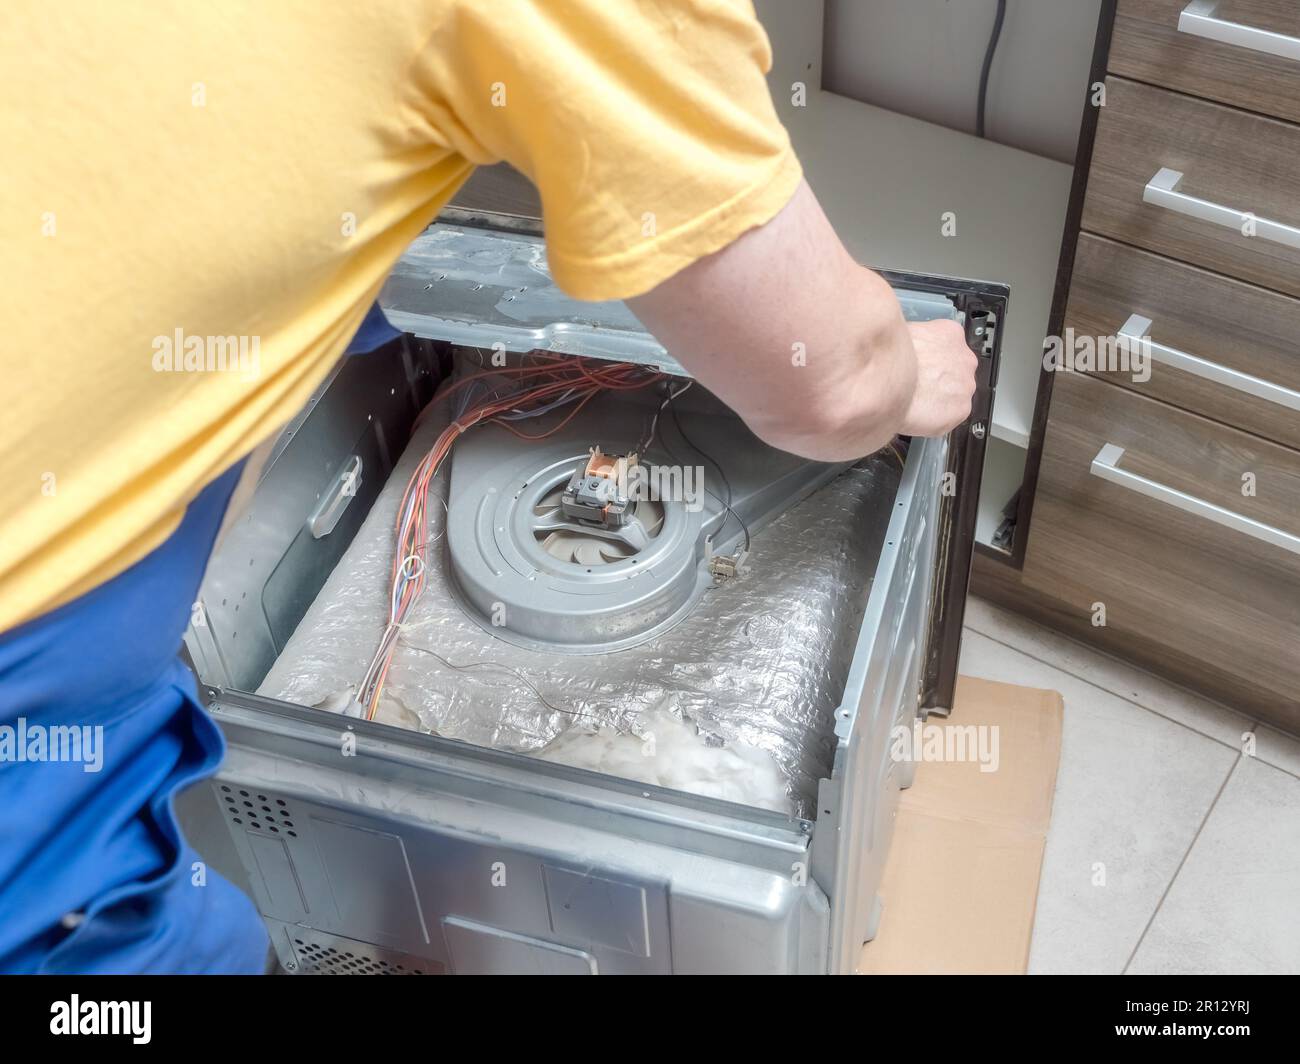 Serviceman detaching top cover of broken electric oven for easy repair access Stock Photo